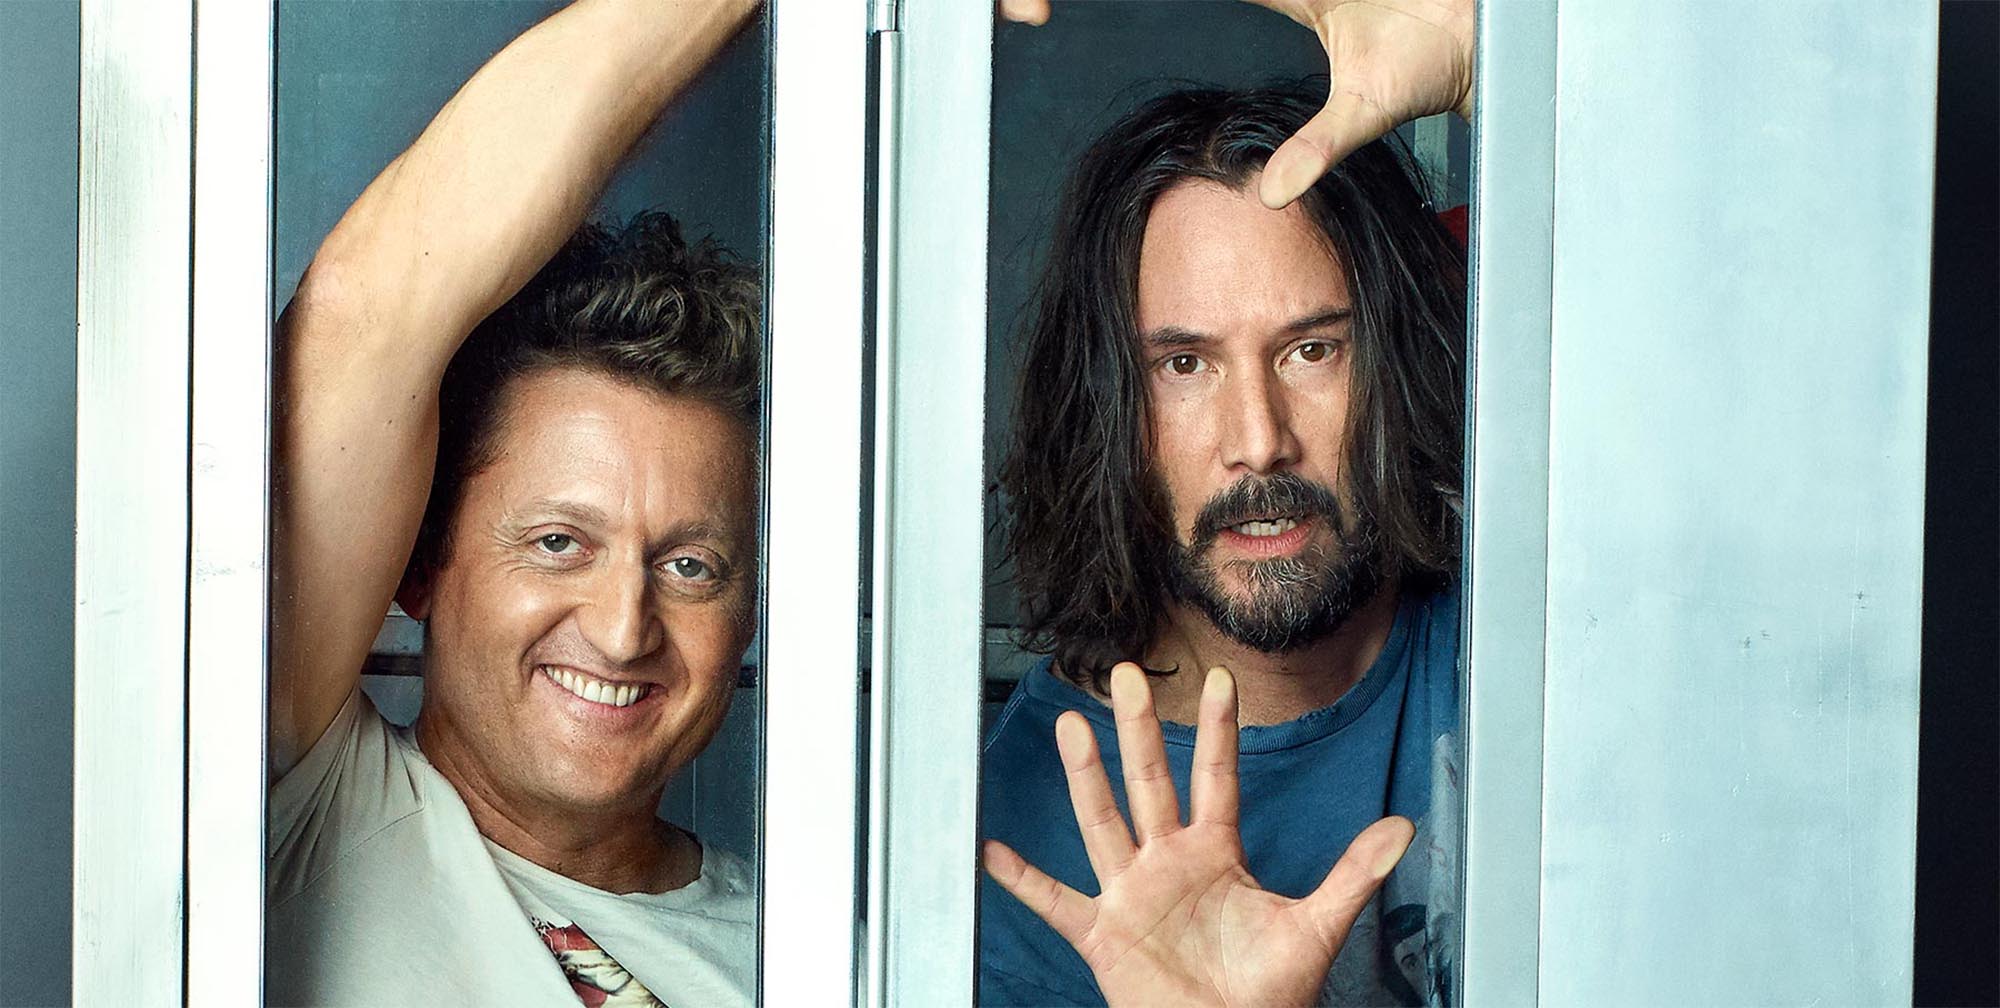 Bill and Ted are a legendary screen duo, with 'Bill and Ted 3' out we made a list of their most excellent and bogus moments from movie 1 on!